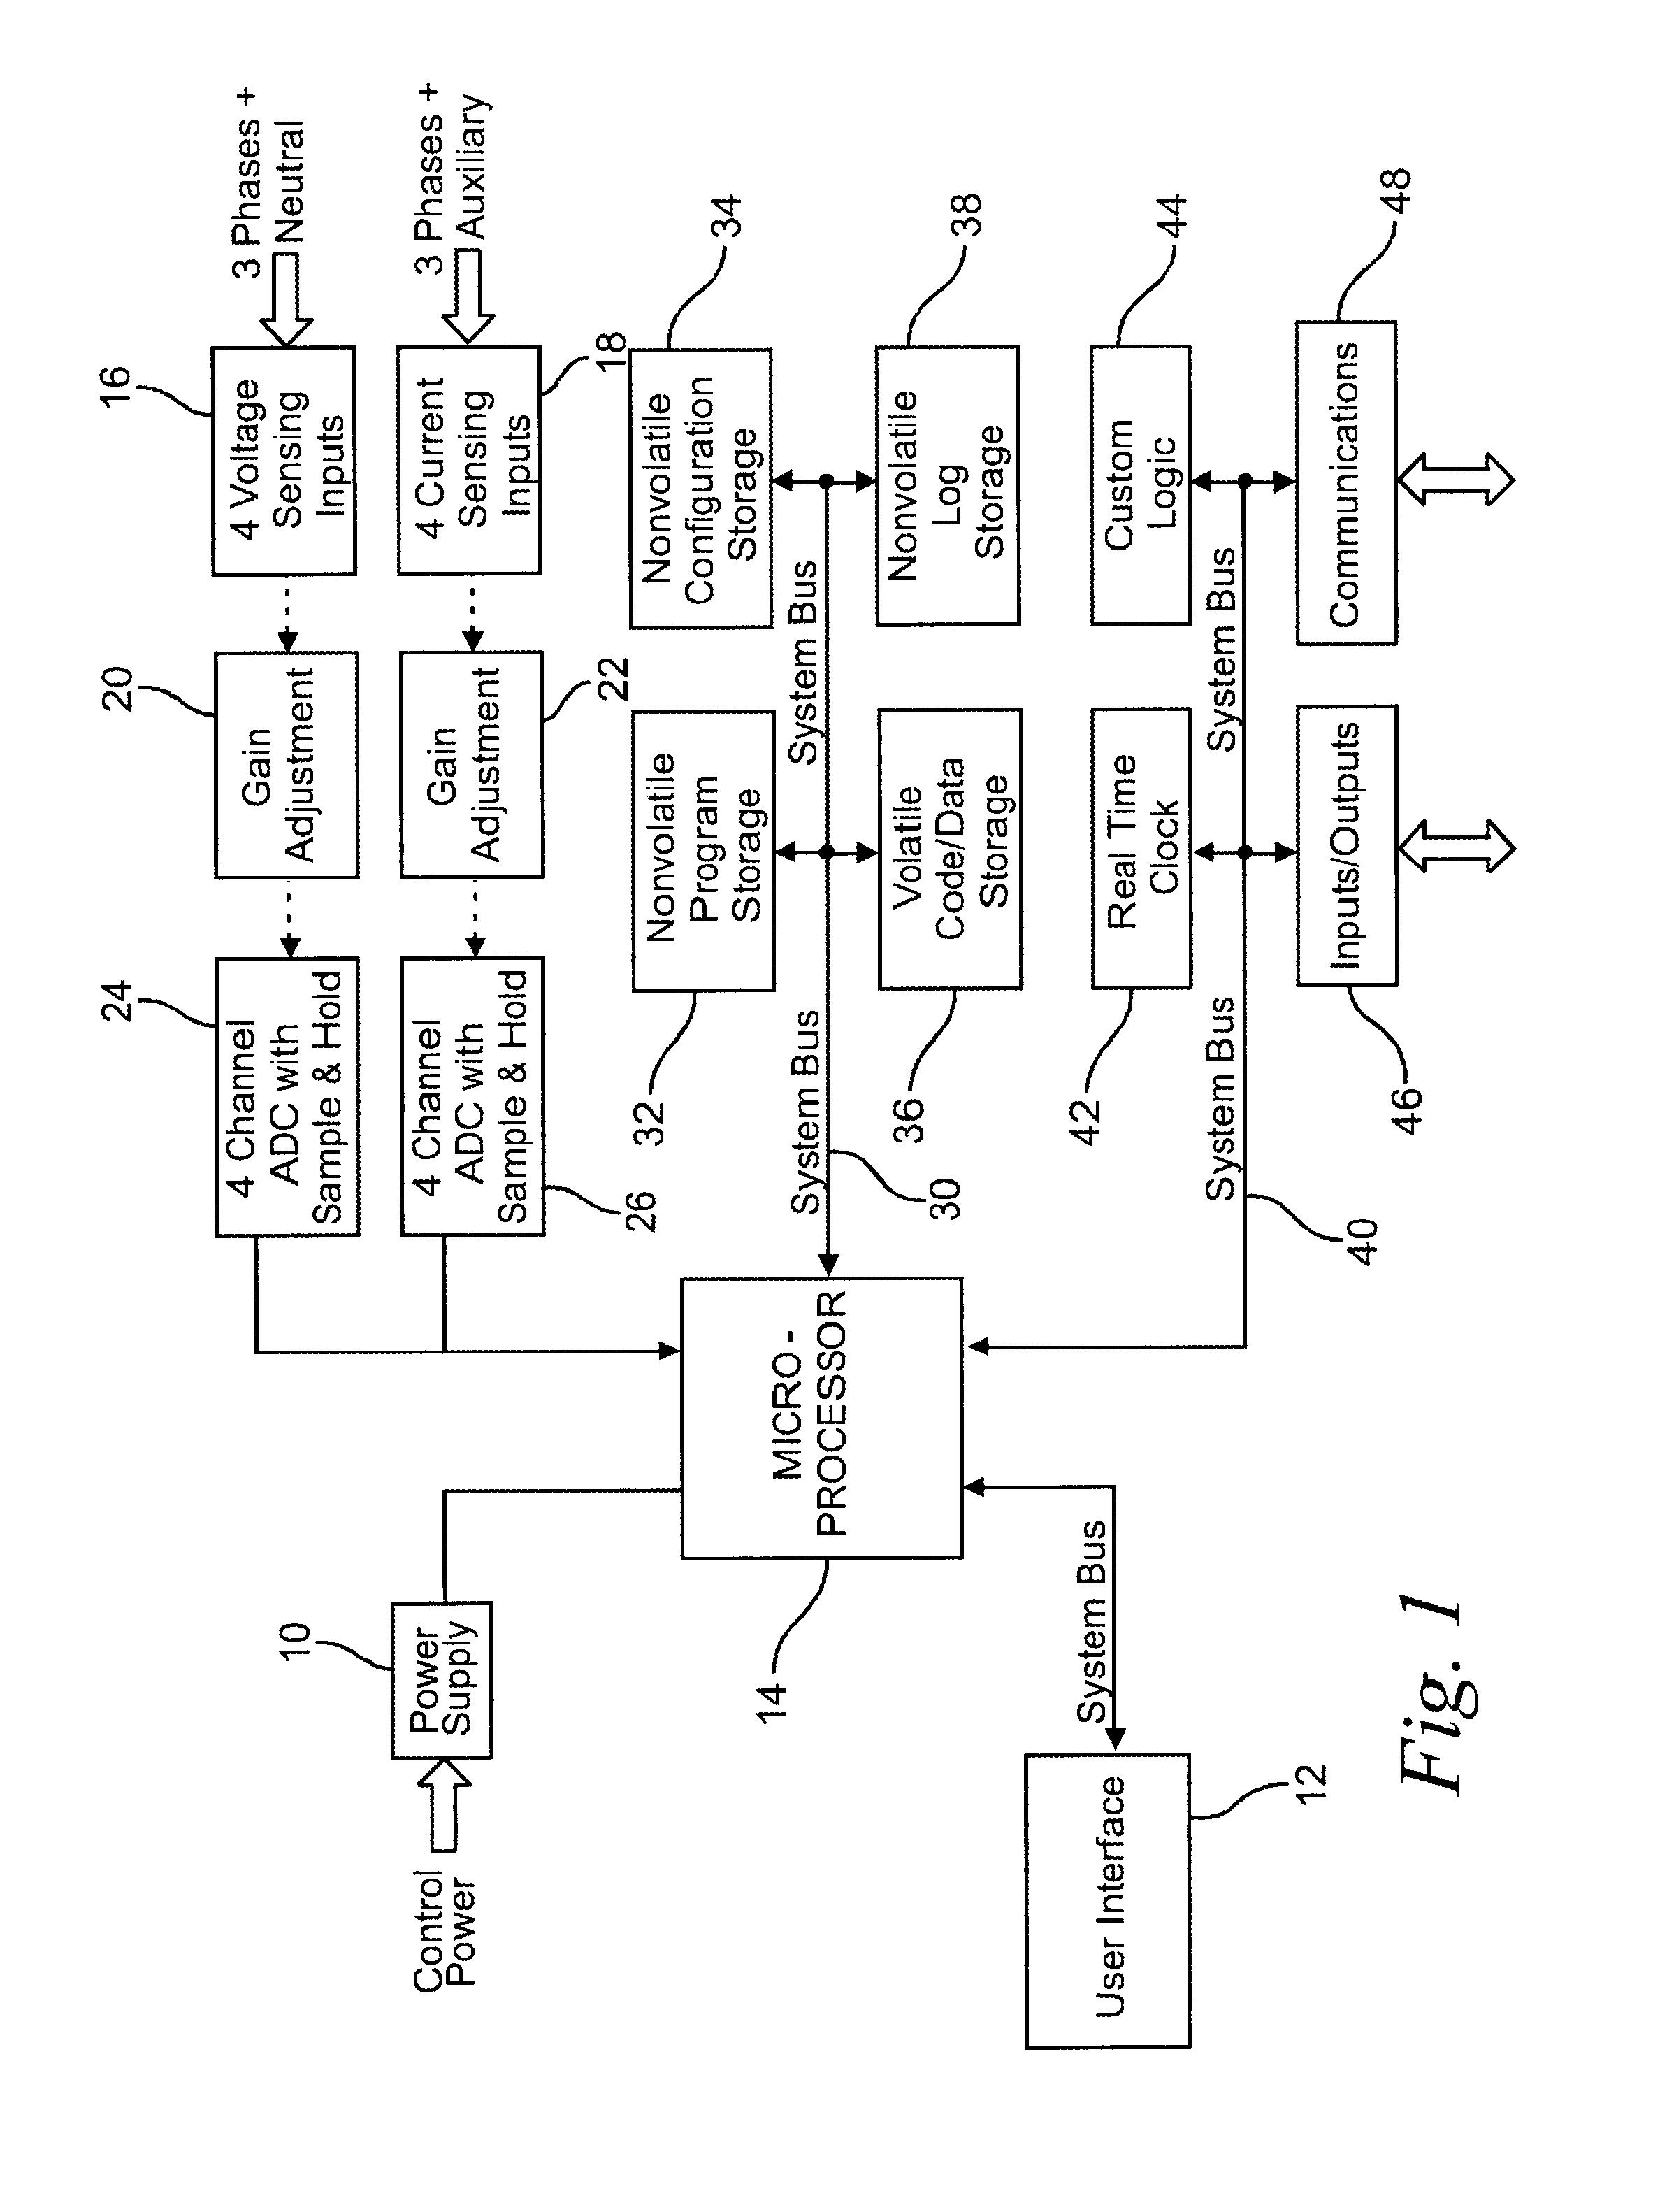 Automated alarm setpoint learning in an electrical meter